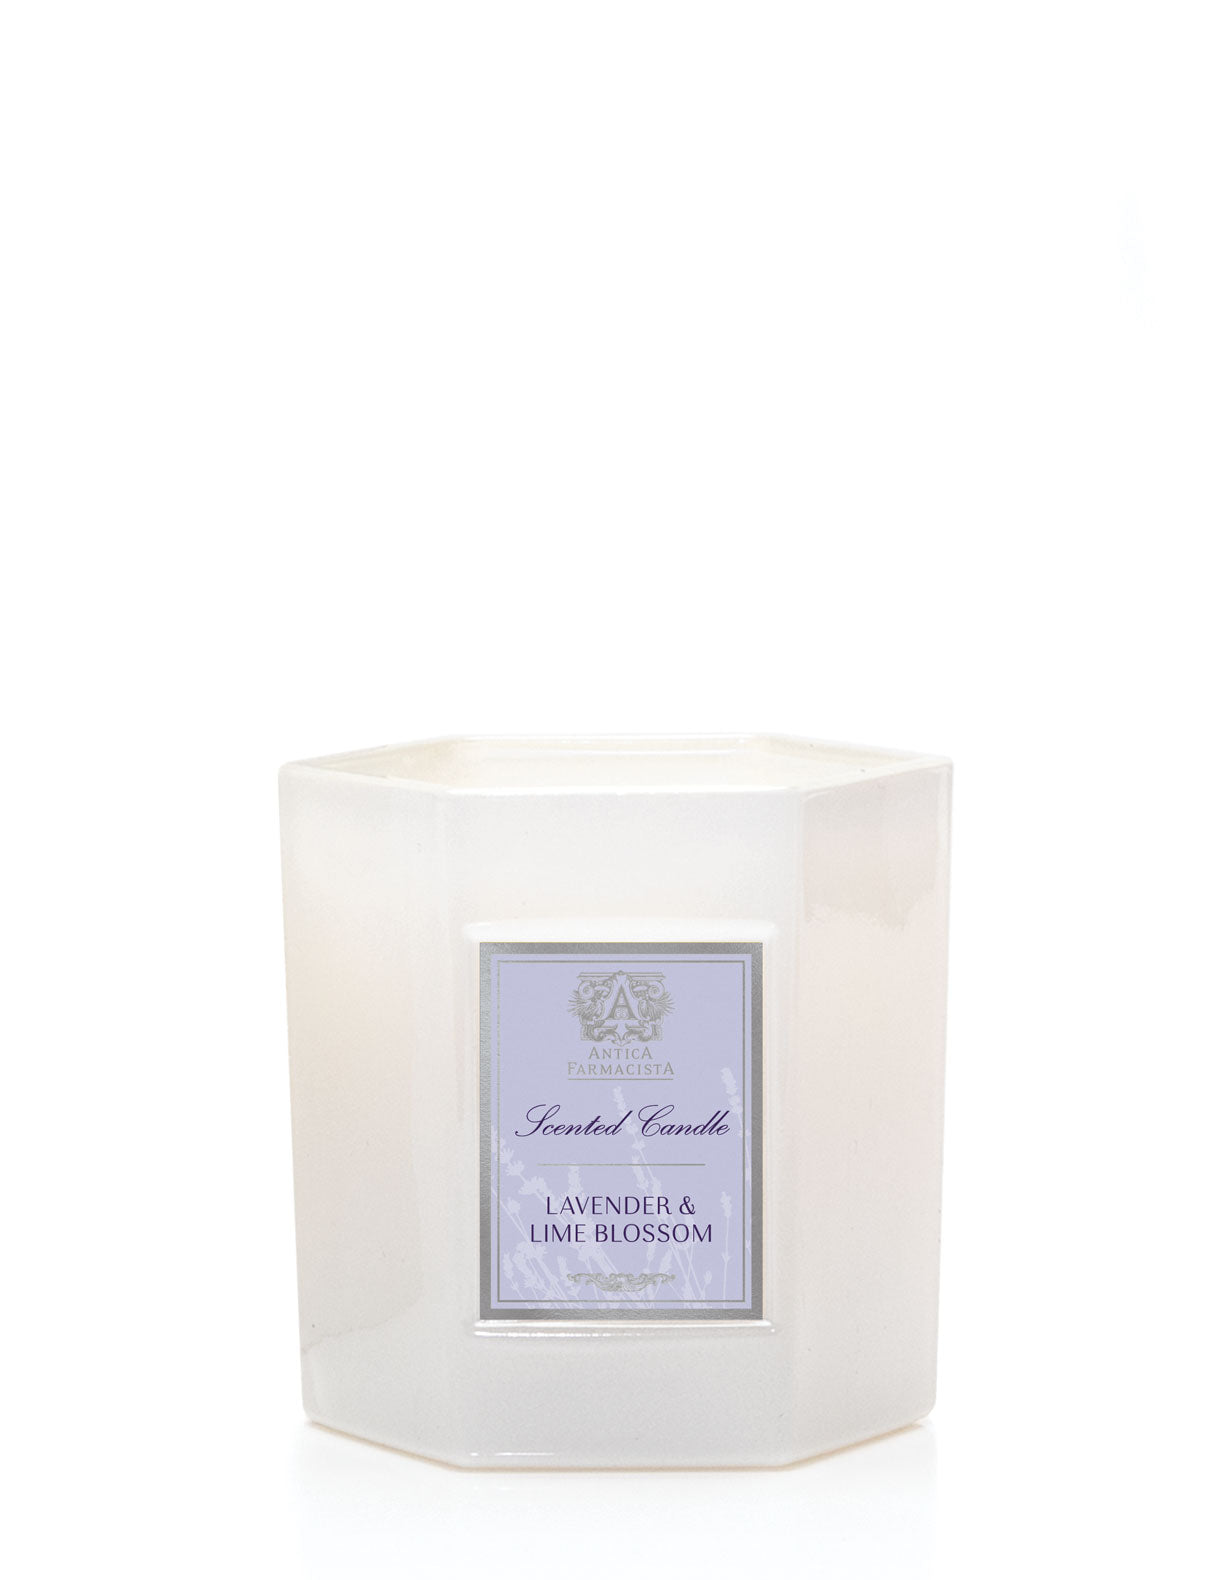 Lavender & Lime Blossom Candle